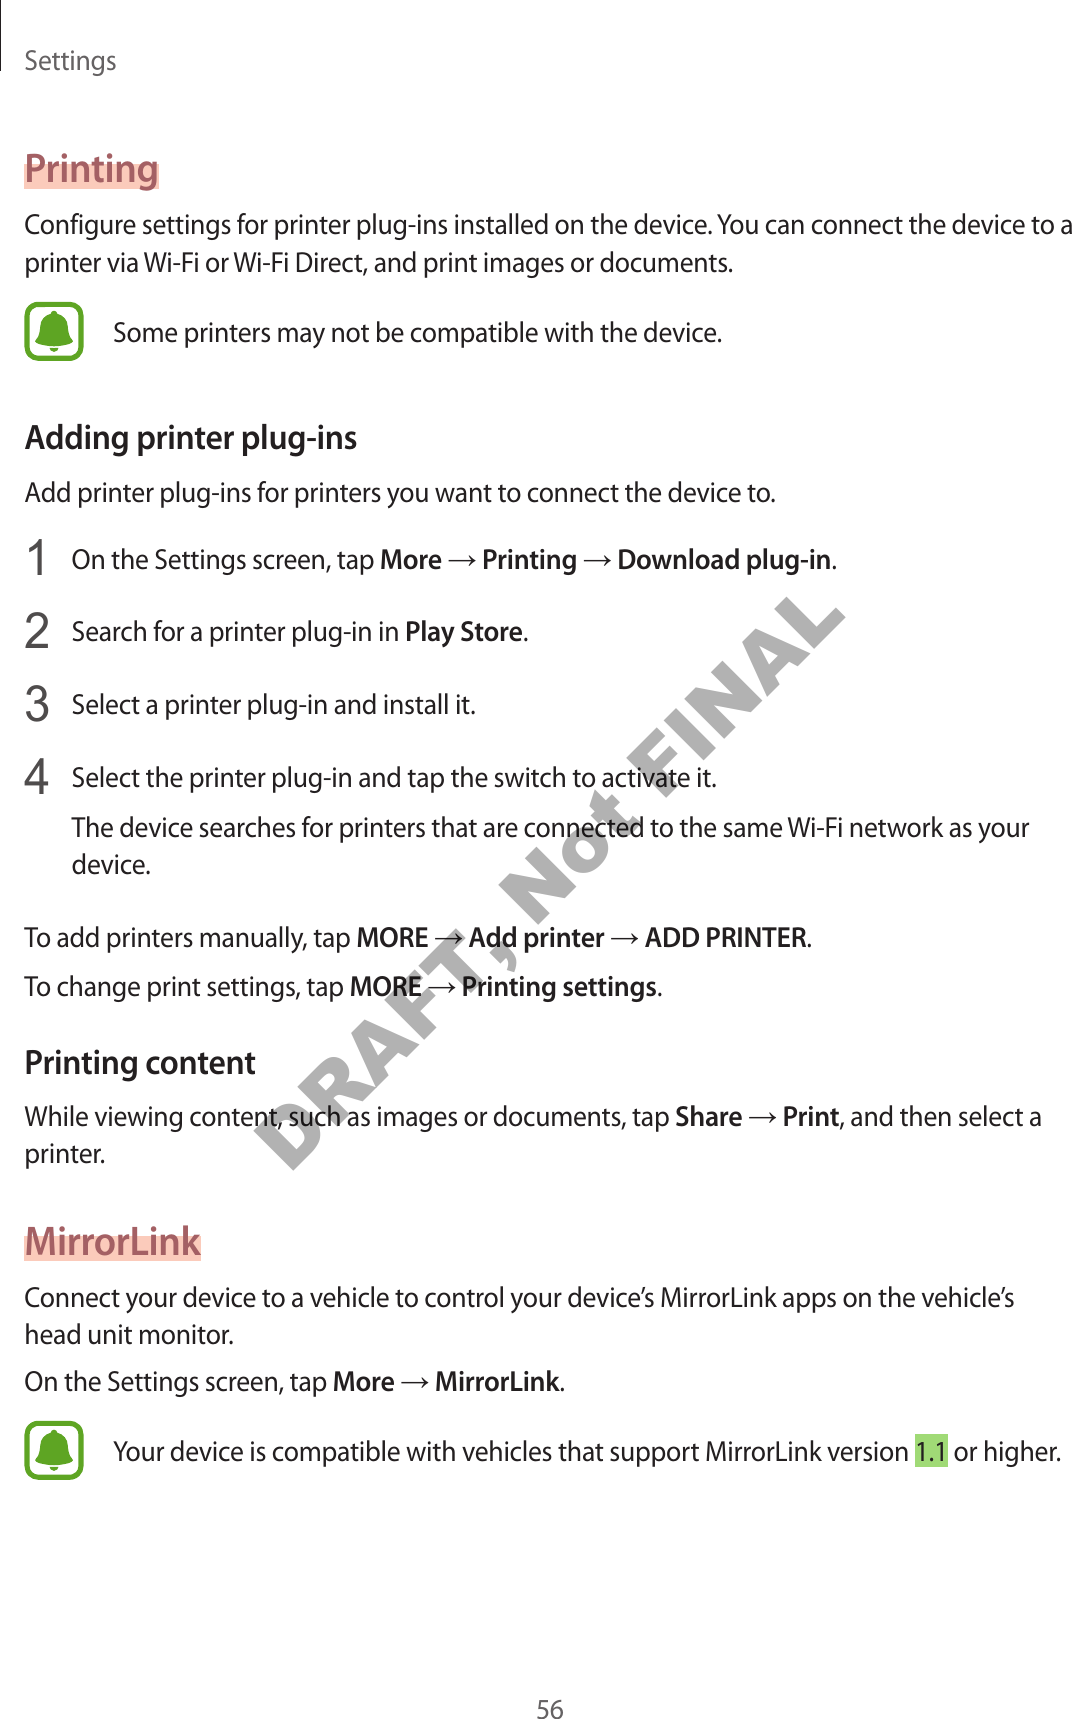 Settings56PrintingConfigure settings for printer plug-ins installed on the device. You can connect the device to a printer via Wi-Fi or Wi-Fi Direct, and print images or documents.Some printers may not be compatible with the device.Adding printer plug-insAdd printer plug-ins for printers you want to connect the device to.1  On the Settings screen, tap More  Printing  Download plug-in.2  Search for a printer plug-in in Play Store.3  Select a printer plug-in and install it.4  Select the printer plug-in and tap the switch to activate it.The device searches for printers that are connected to the same Wi-Fi network as your device.To add printers manually, tap MORE  Add printer  ADD PRINTER.To change print settings, tap MORE  Printing settings.Printing contentWhile viewing content, such as images or documents, tap Share  Print, and then select a printer.MirrorLinkConnect your device to a vehicle to control your device’s MirrorLink apps on the vehicle’s head unit monitor.On the Settings screen, tap More  MirrorLink.Your device is compatible with vehicles that support MirrorLink version 1.1 or higher.DRAFT, Not FINAL